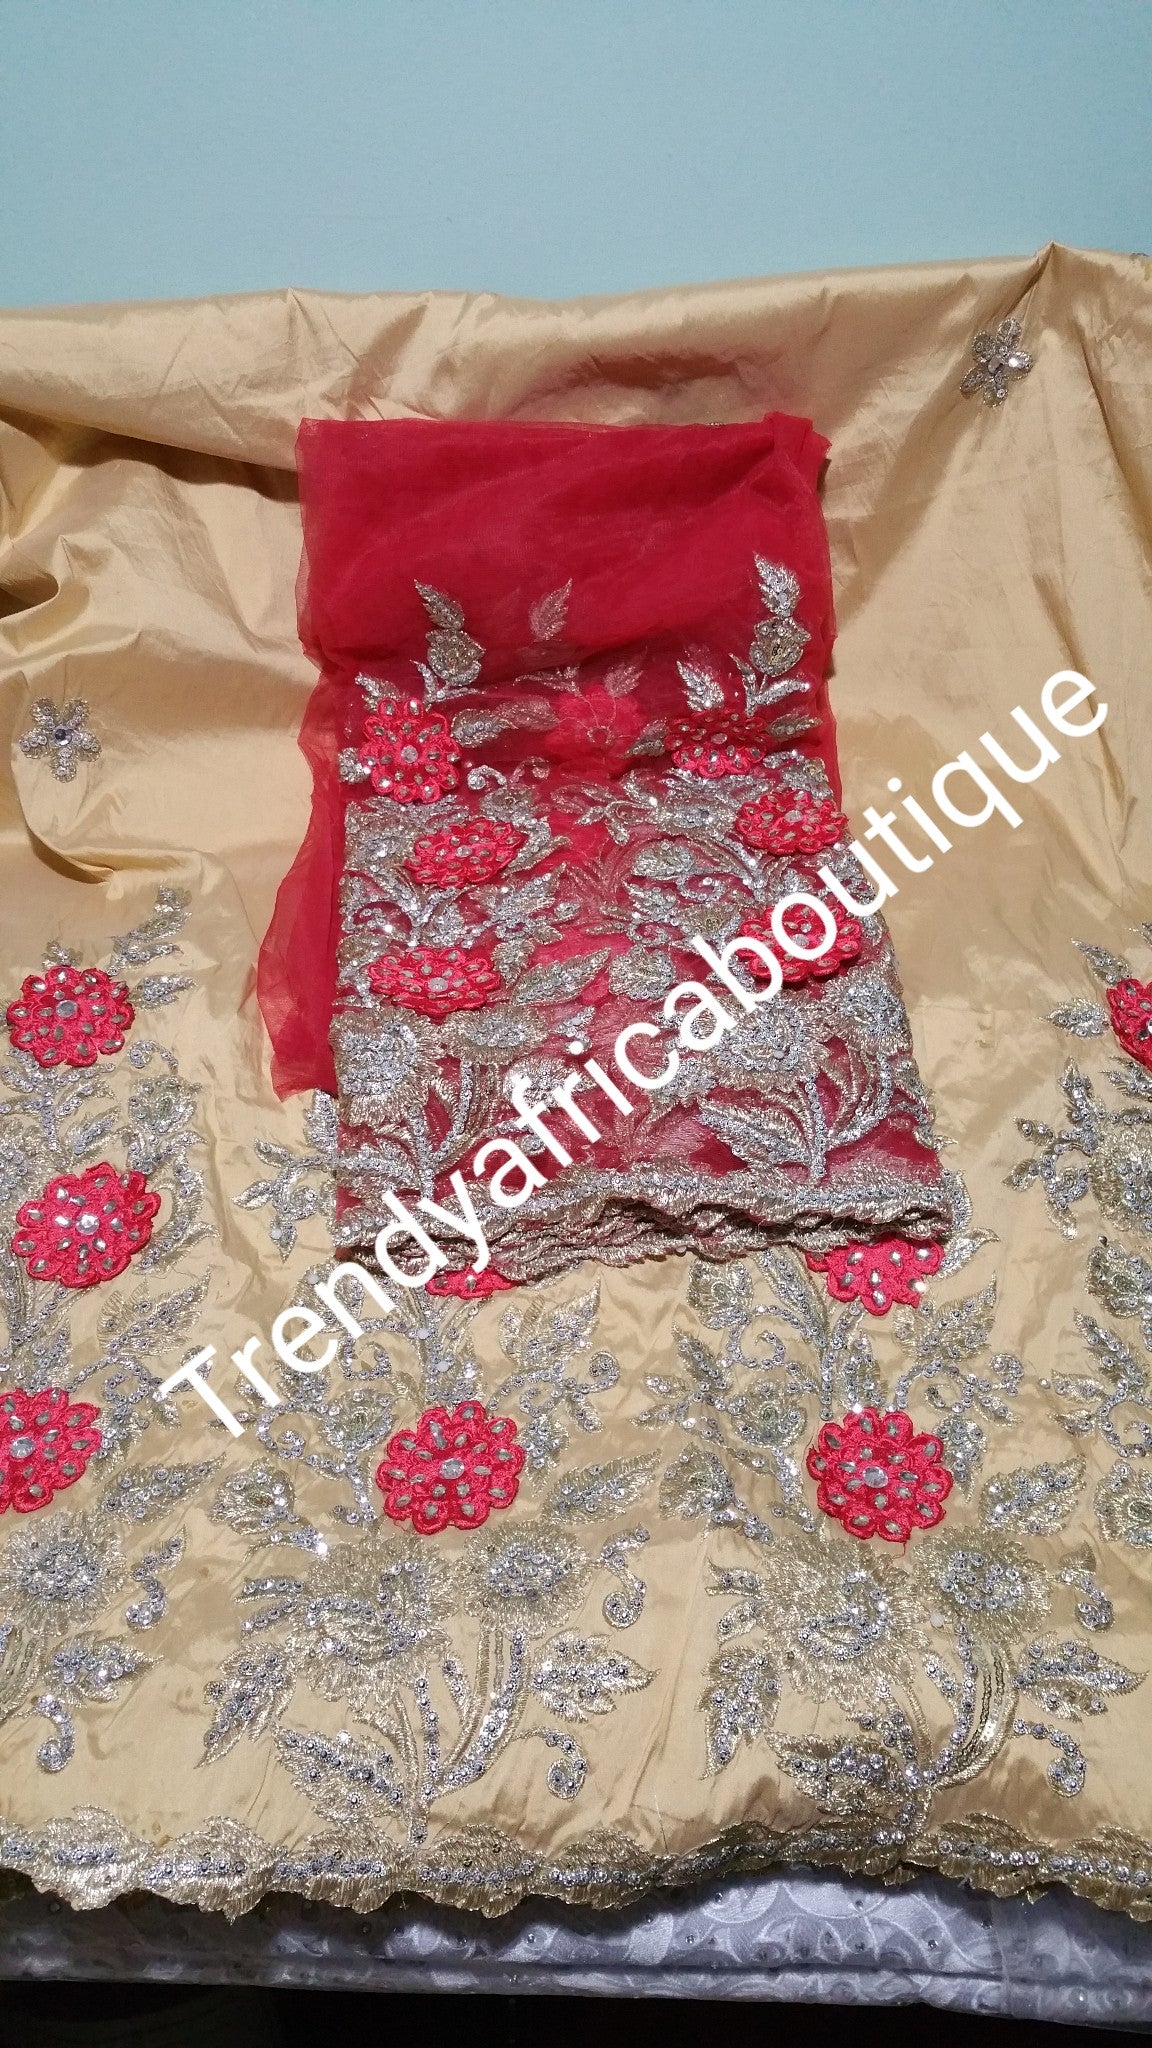 Nigerian Tranditional George wrapper. Embriodery/stones design in Champagne/coral red matching blouse. Small-George.